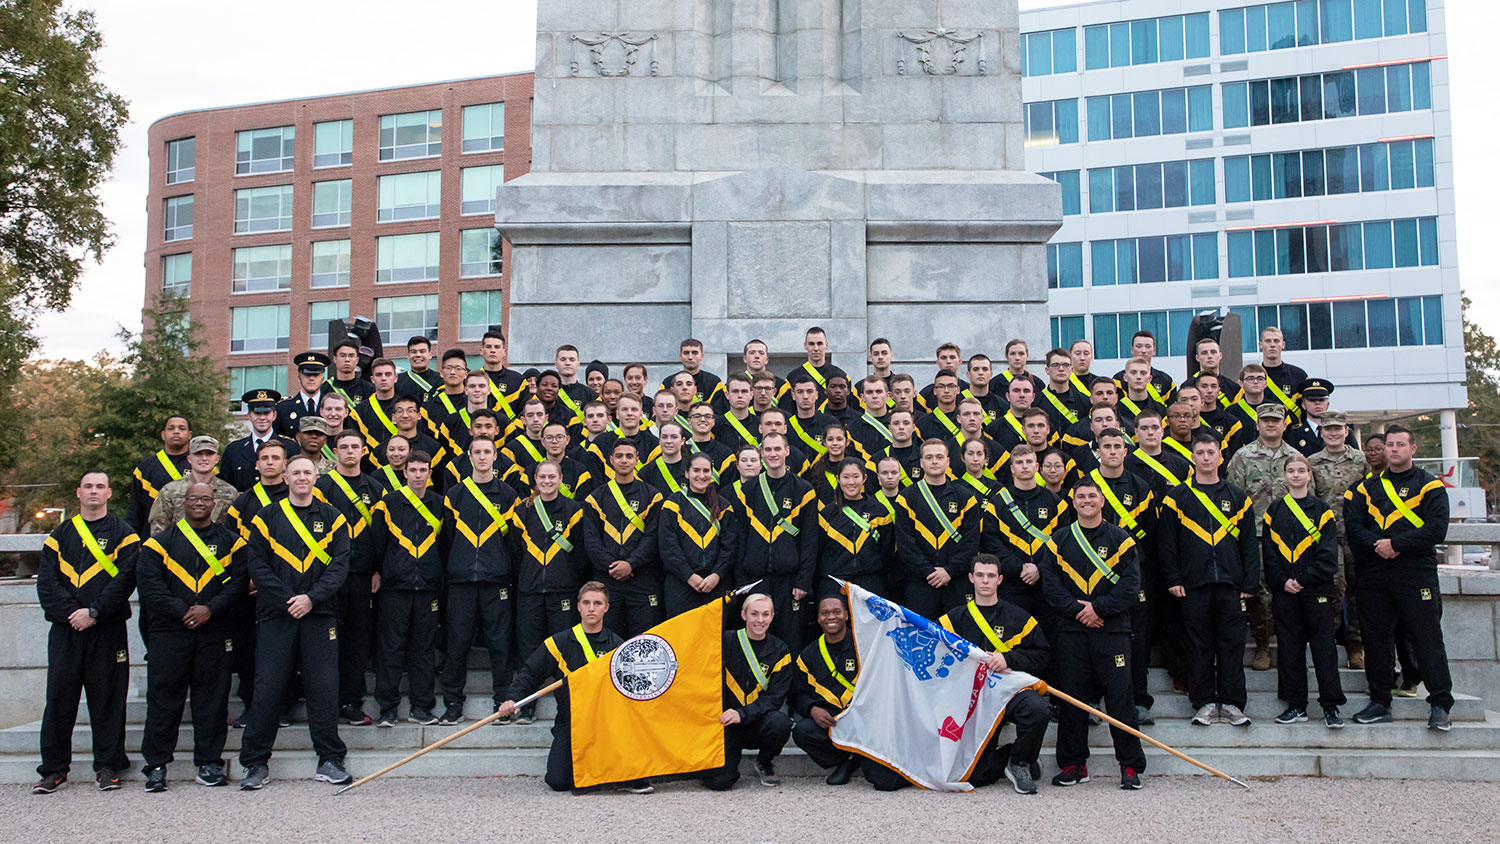 Members of the U.S. Army, Air Force and Navy ROTC units at the Belltower